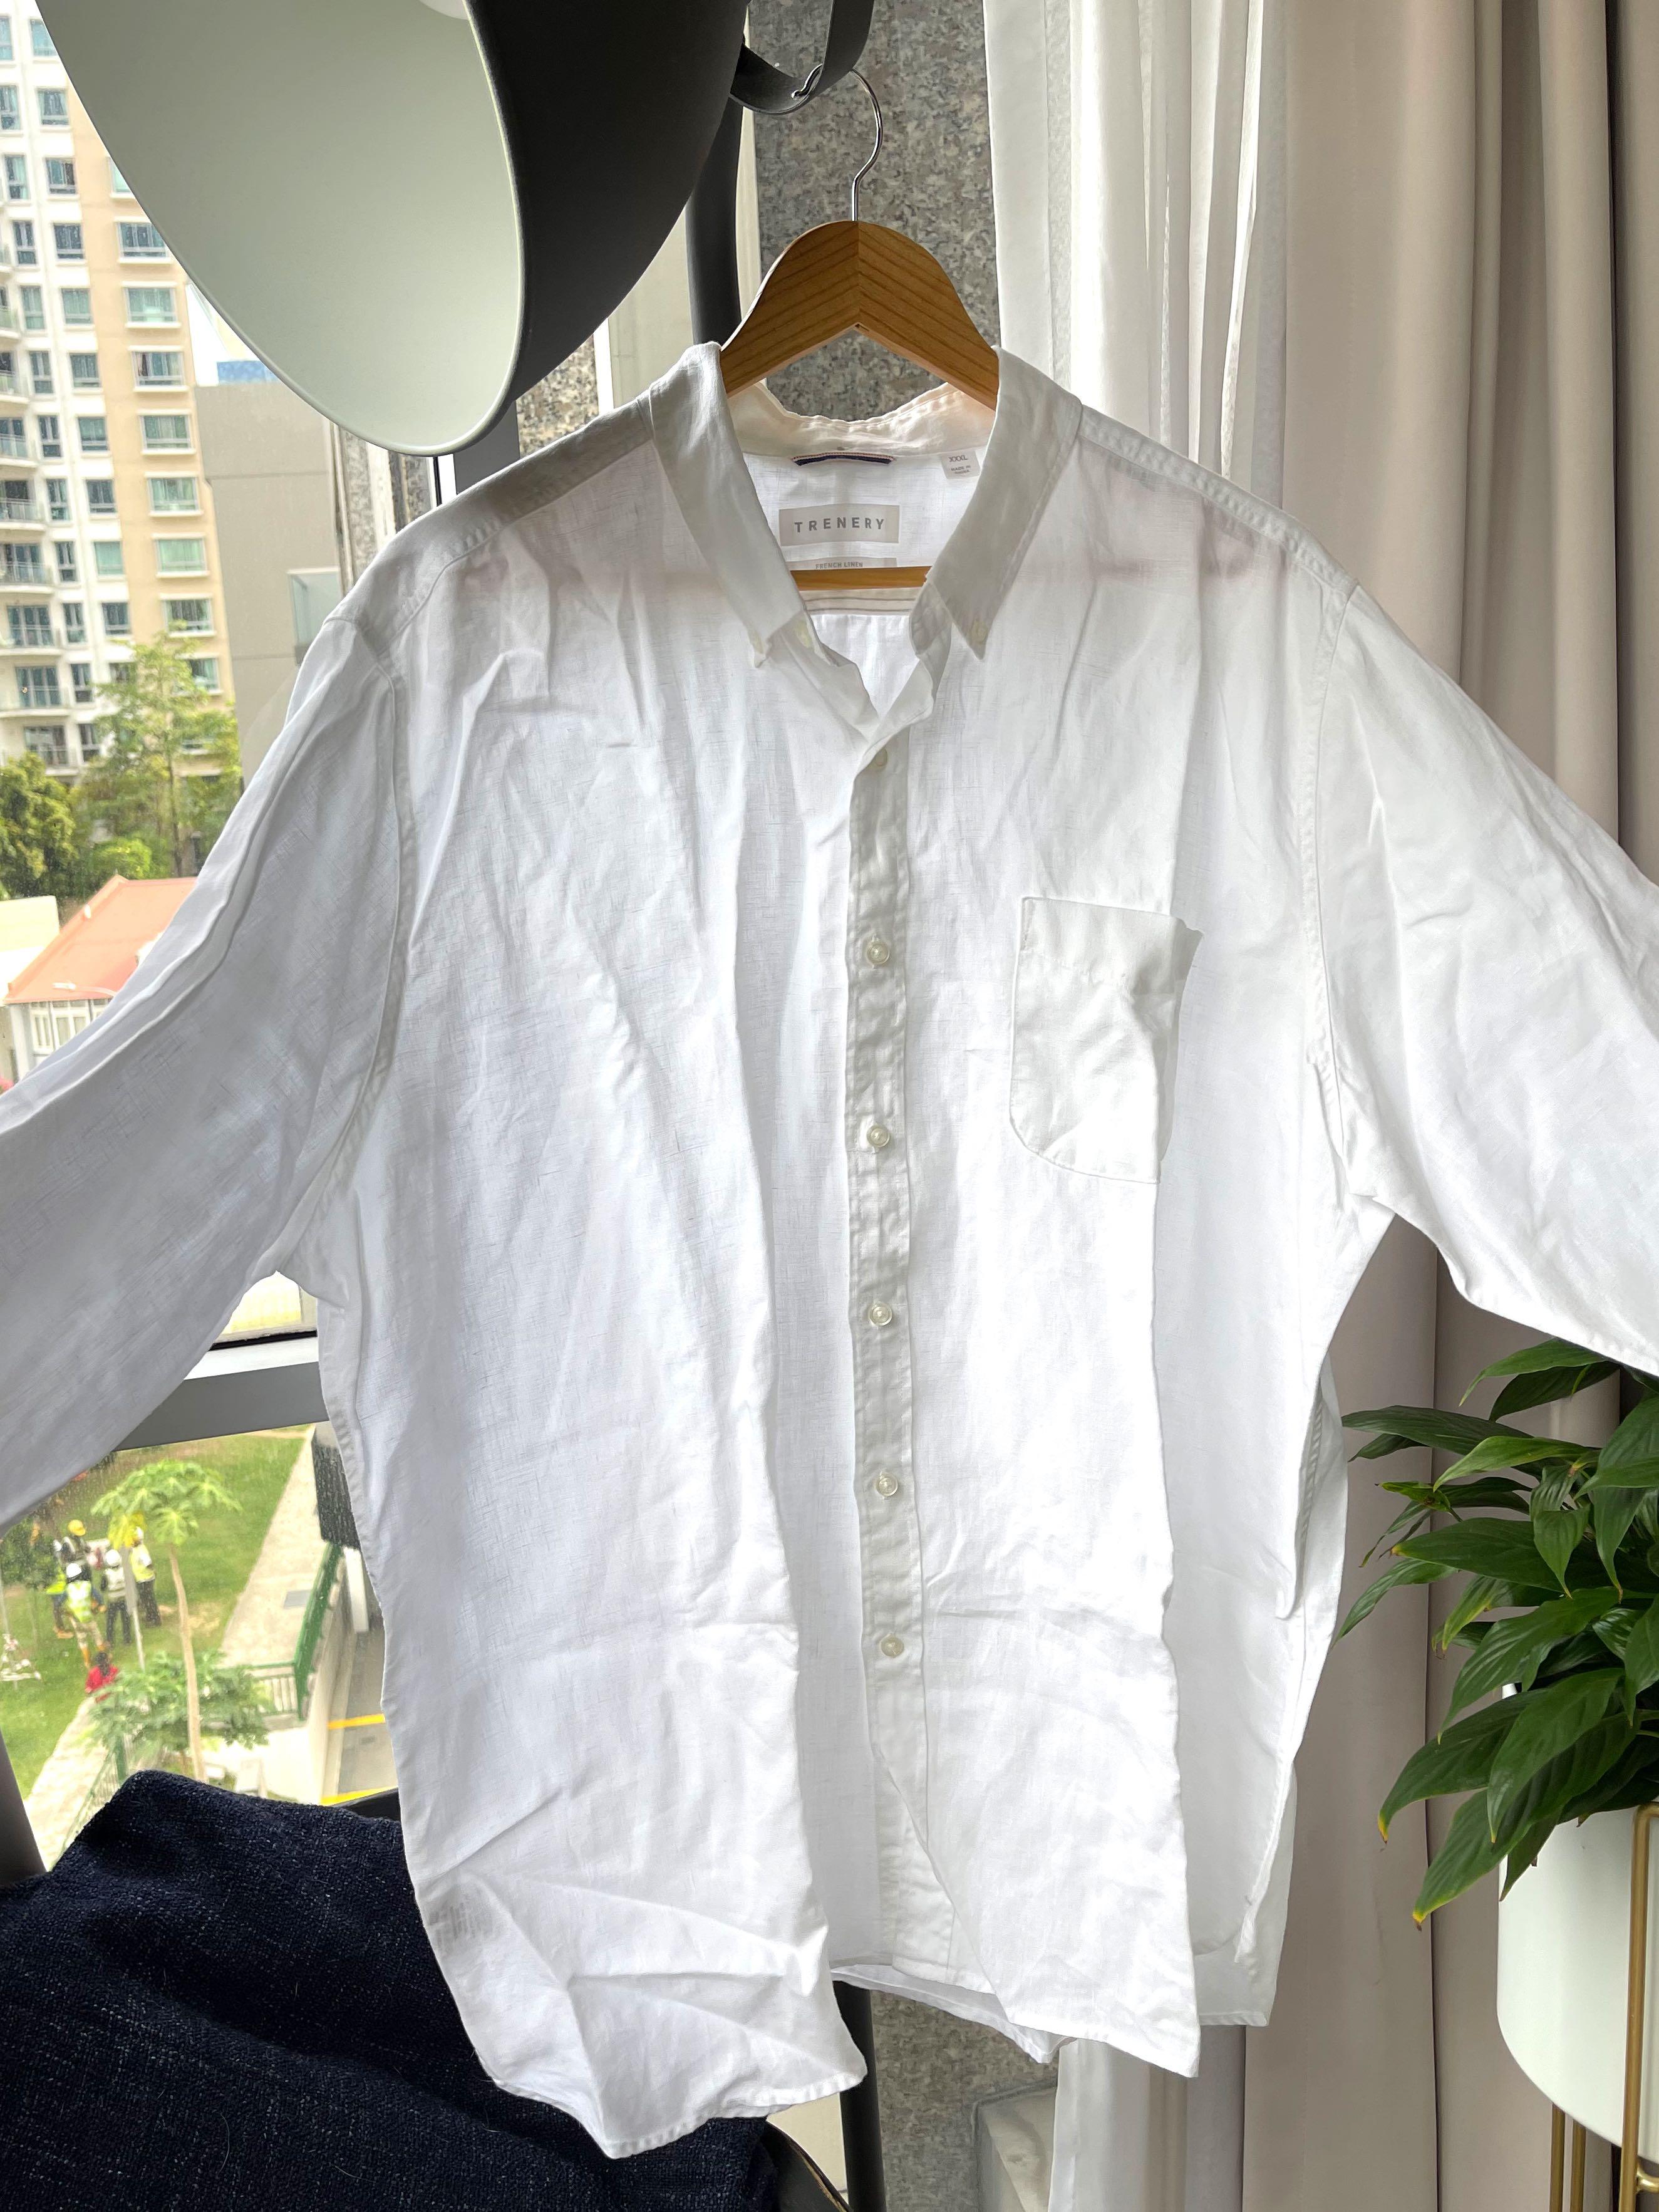 Country Road, Trenery Linen Shirts, Men's Fashion, Tops & Sets, Formal ...